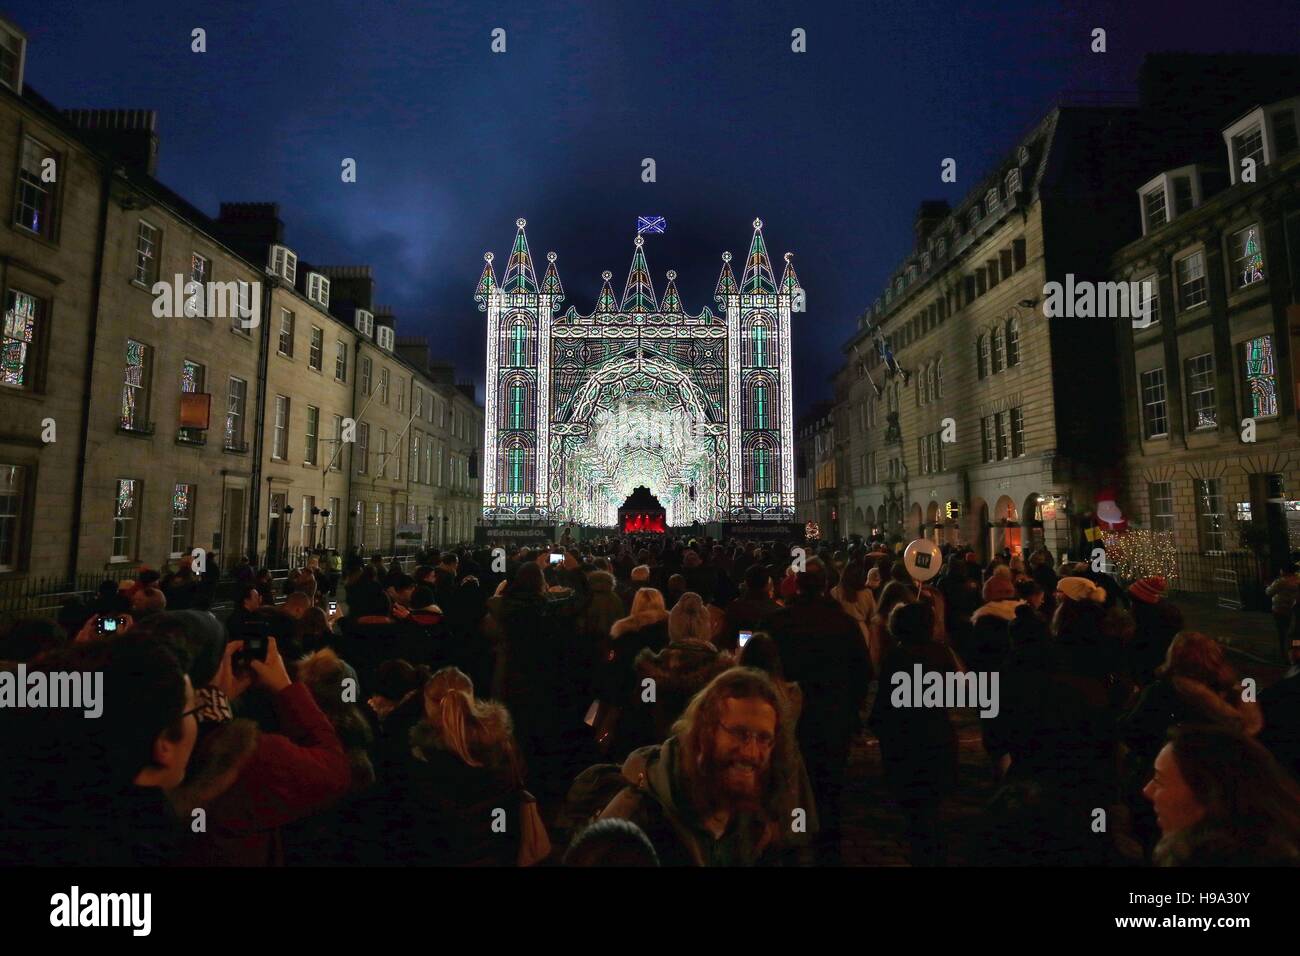 People attend the Light Night event in Edinburgh including the opening of 'Street of Light' on George Street which consists of twenty four arches and has more than 60,000 lights. Stock Photo